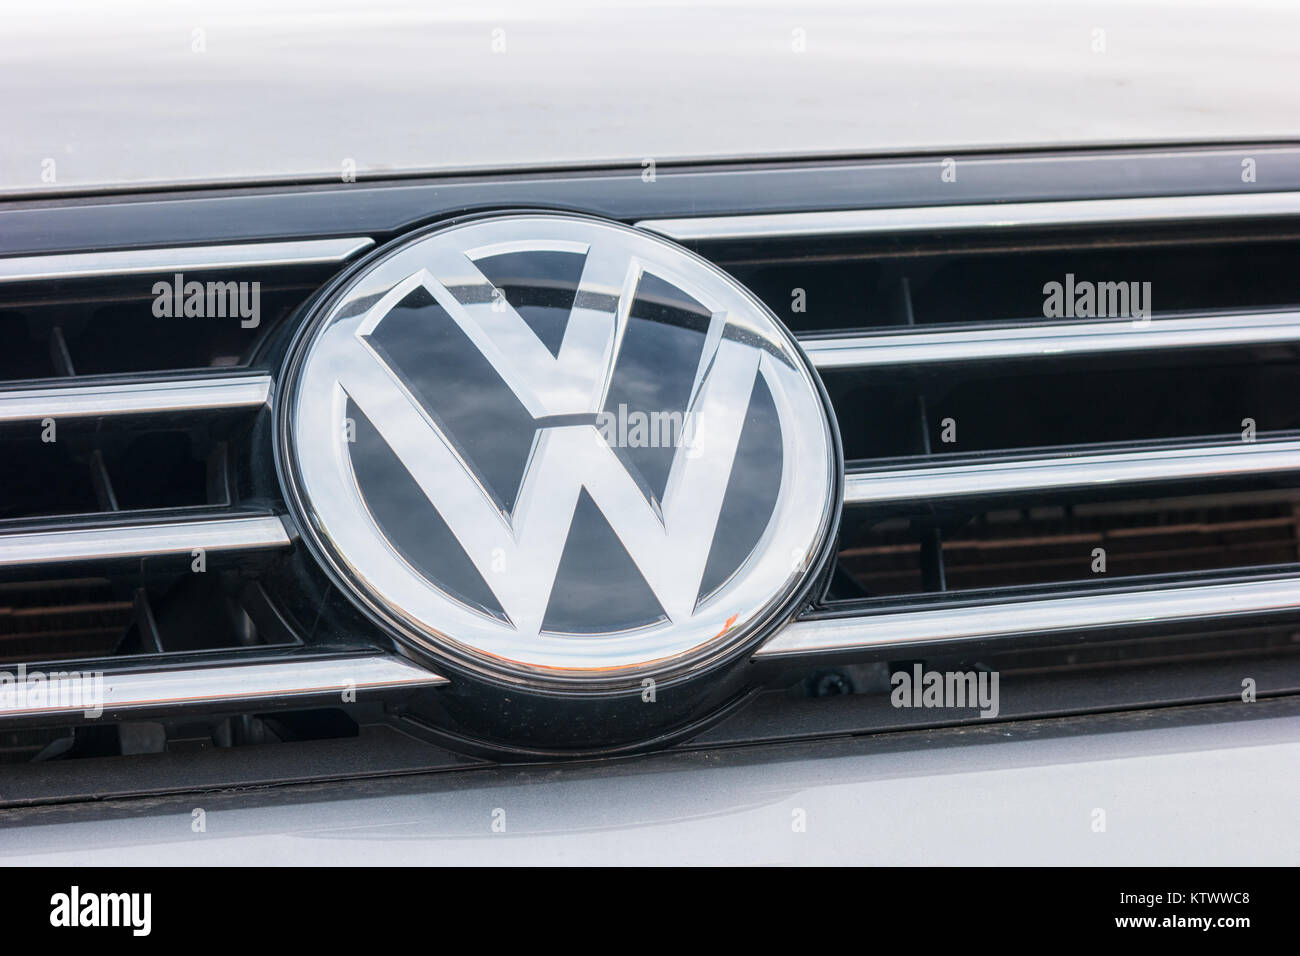 Volkswagen VW logo on a silver car. Volkswagen is a famous European car manufacturer company based on Germany. Stock Photo